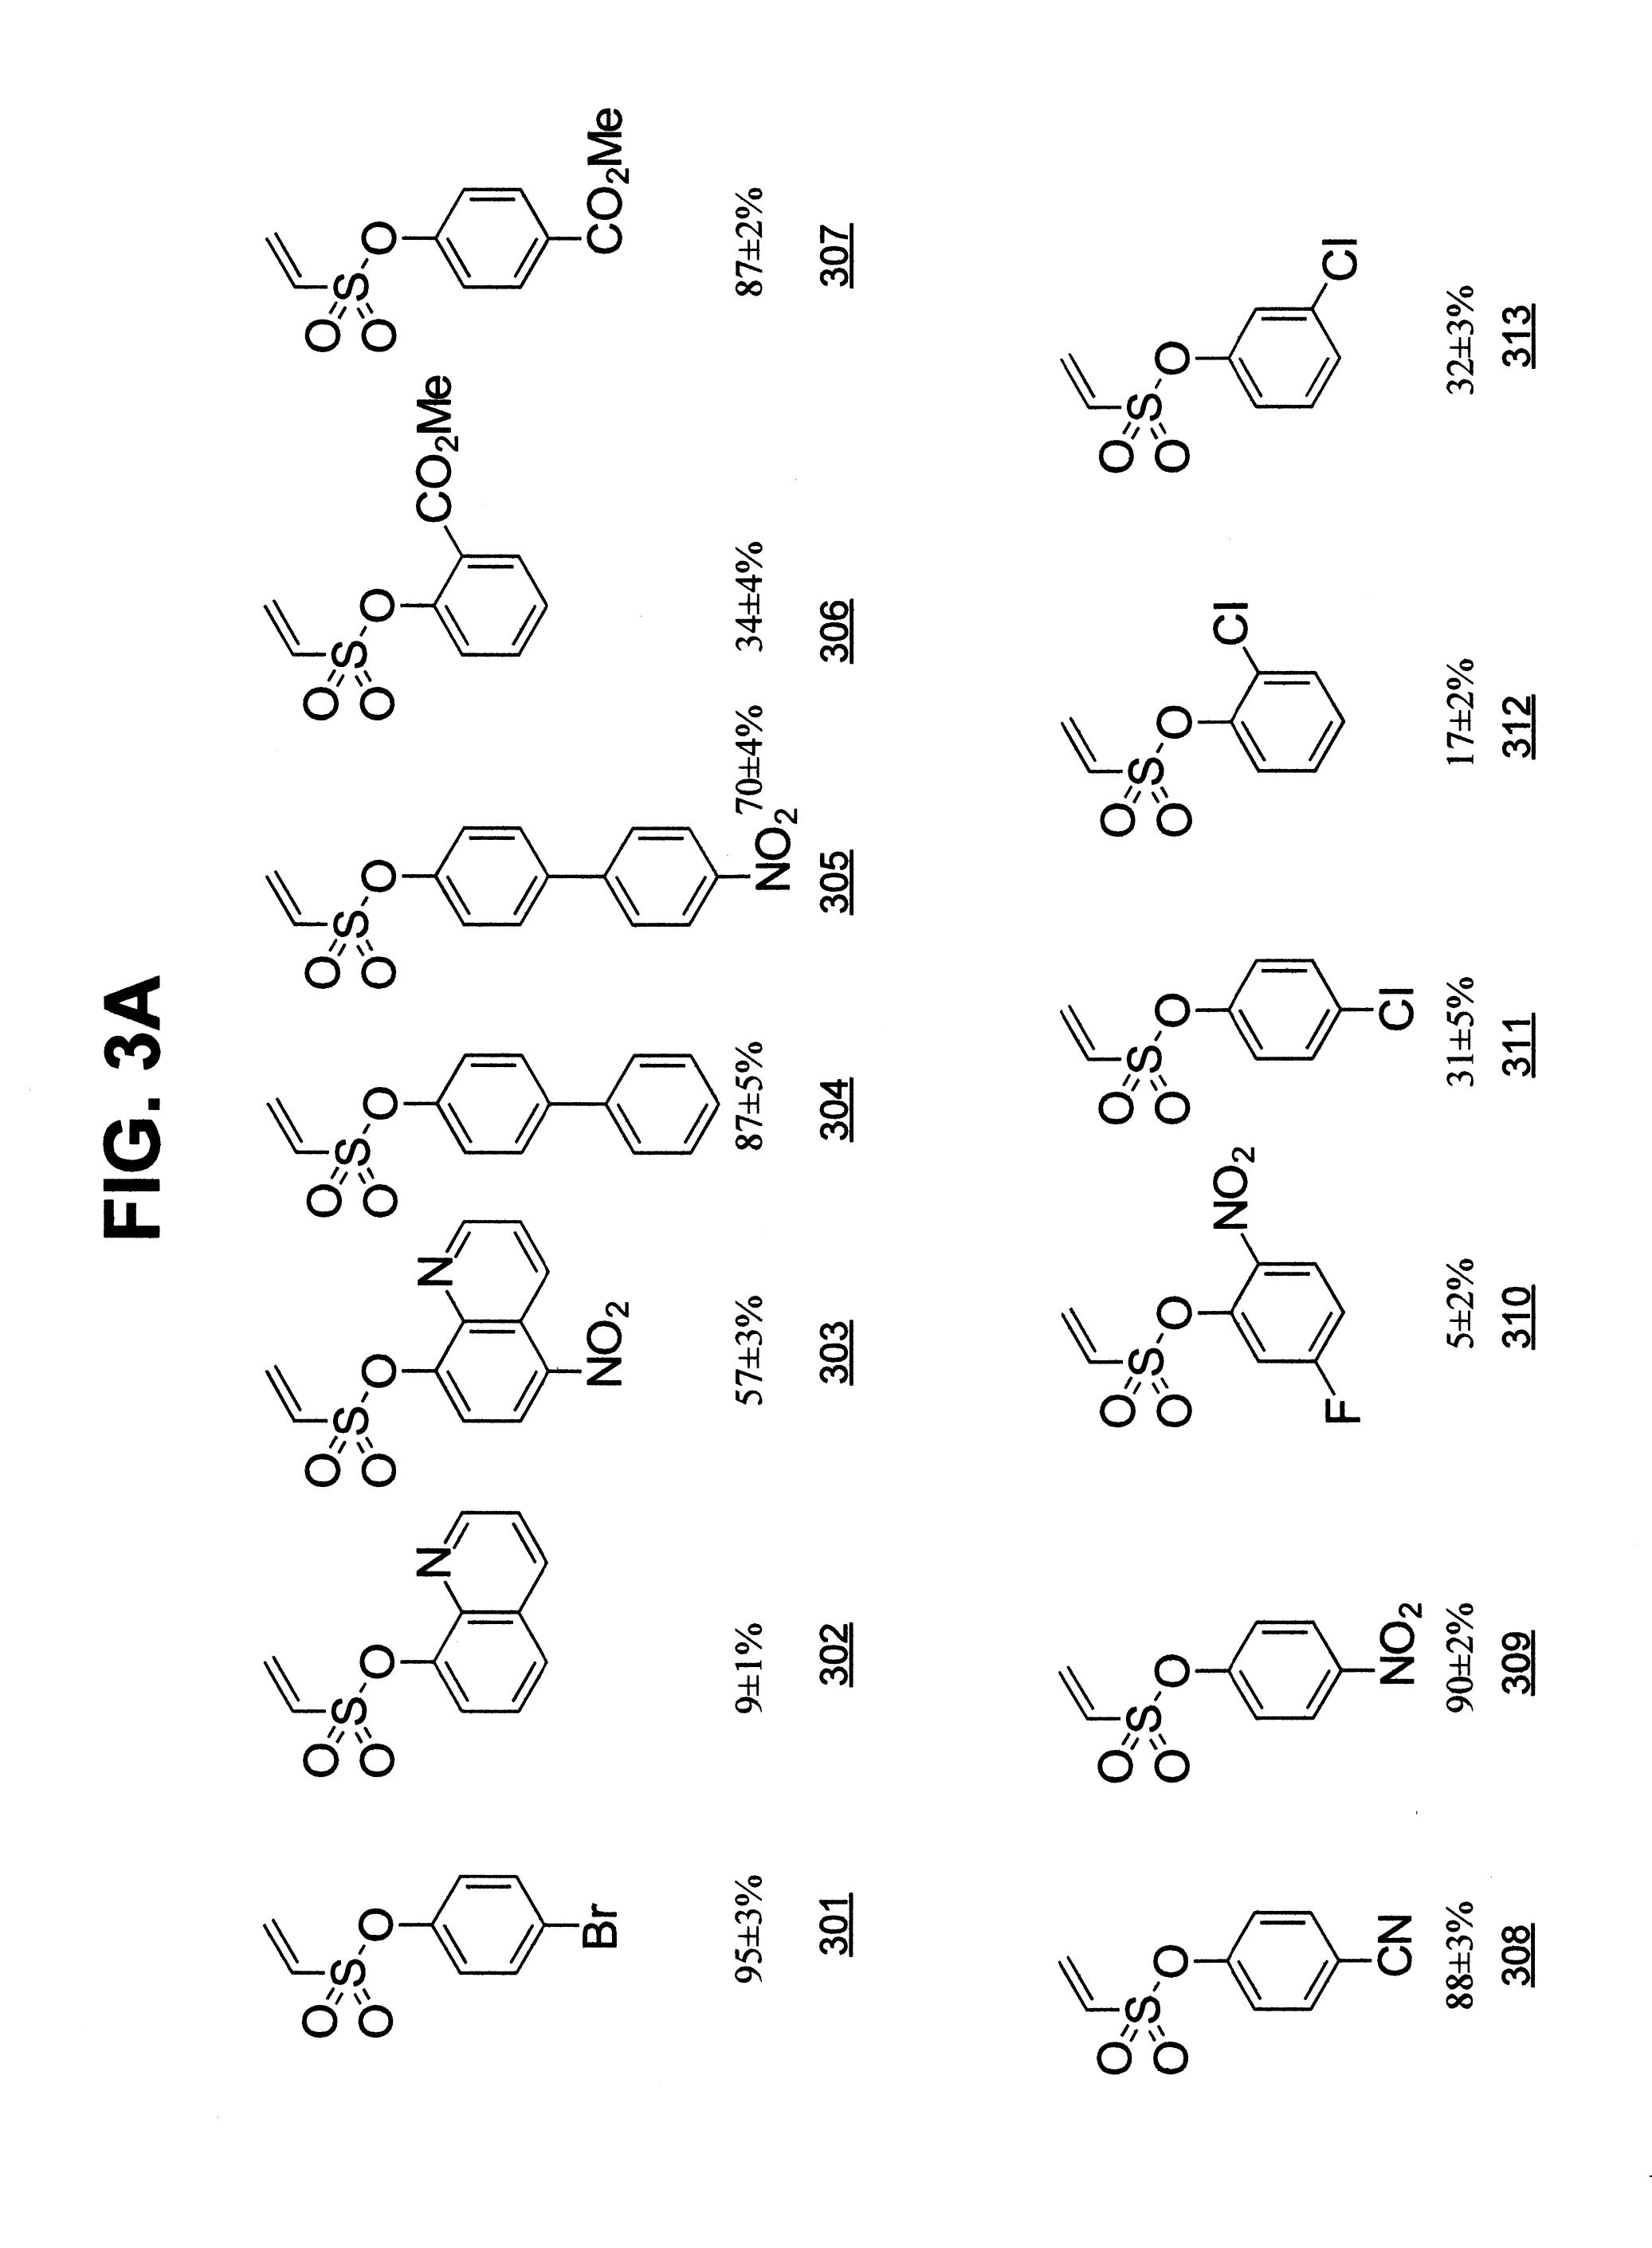 Cathepsin L inhibitors and probes comprising vinyl sulfonate moiety and methods of using same